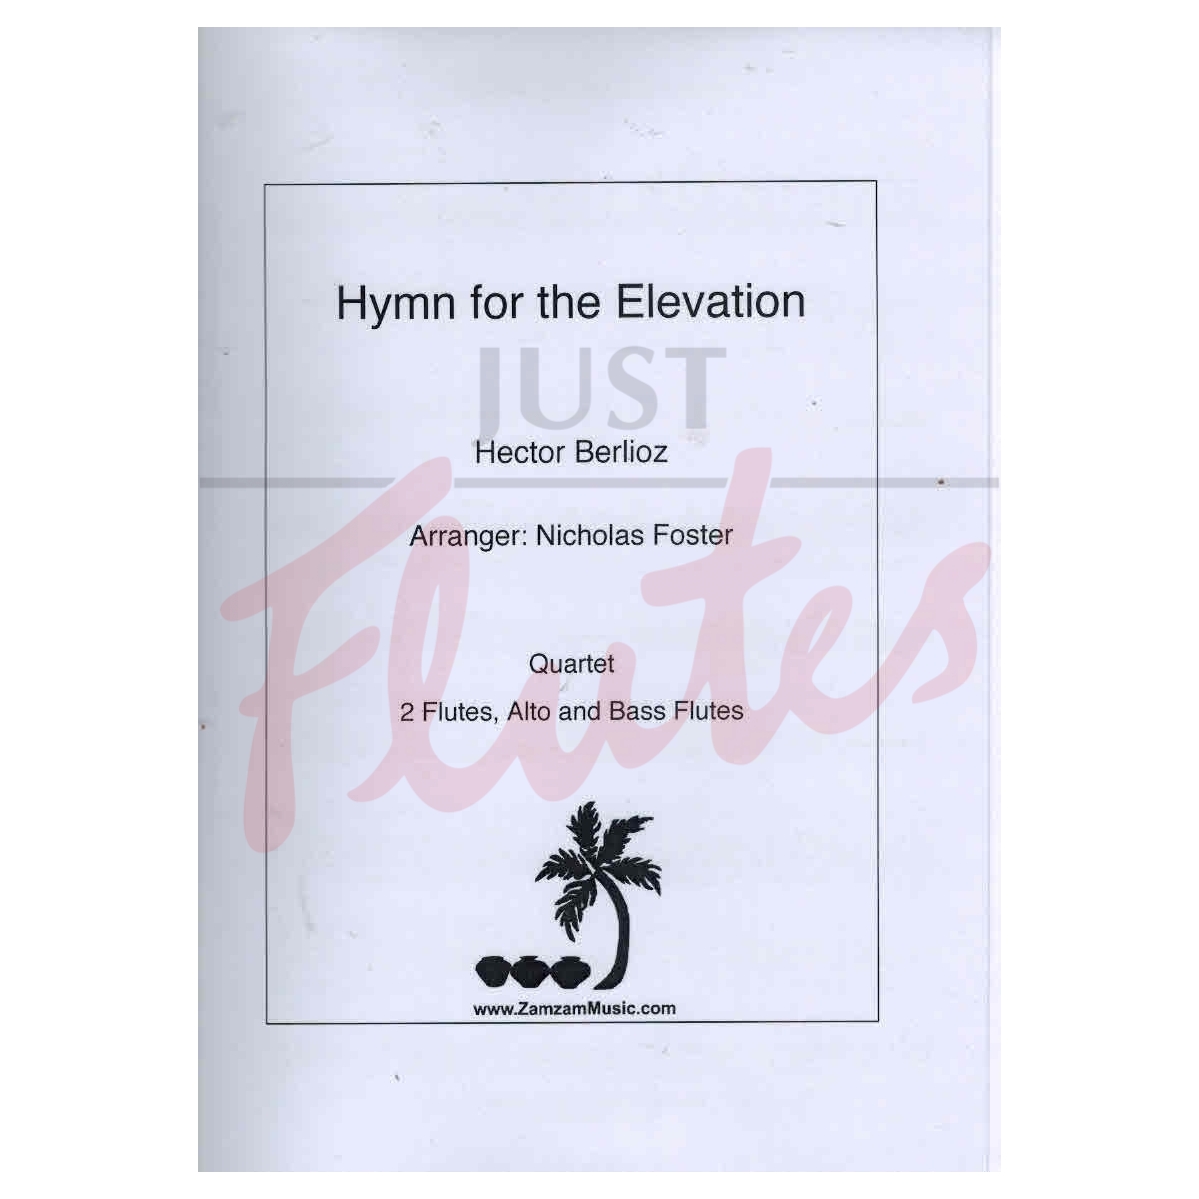 Hymn for the Elevation arranged for Four Flutes